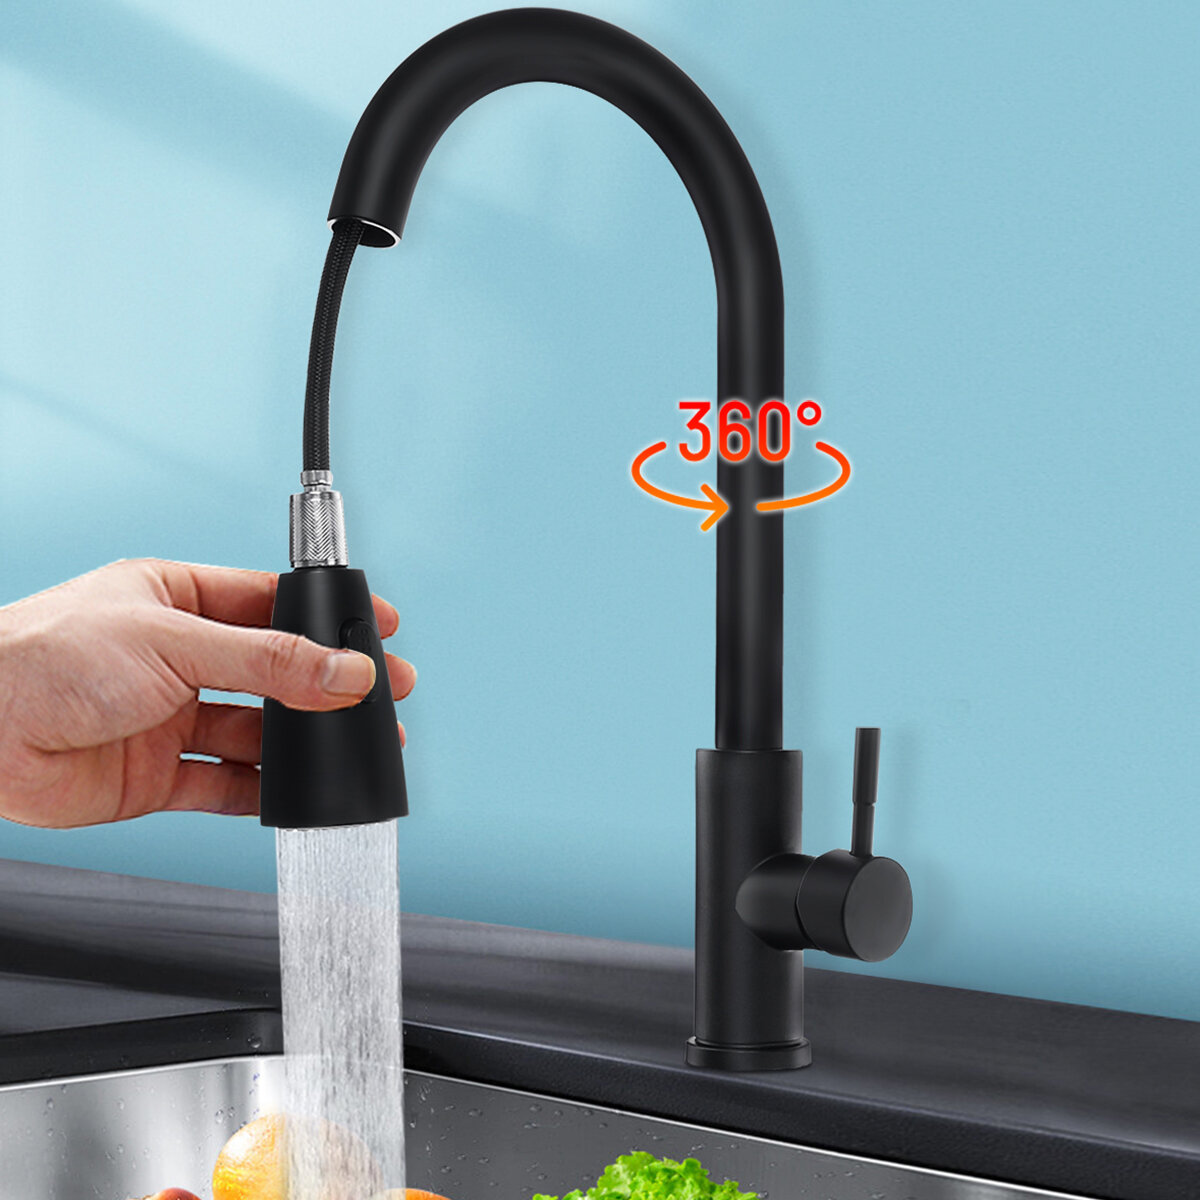 

Kitchen Pull-Out Faucet Tap Mixer Spout Finish Brushed Swivel Spray 360° Swivel